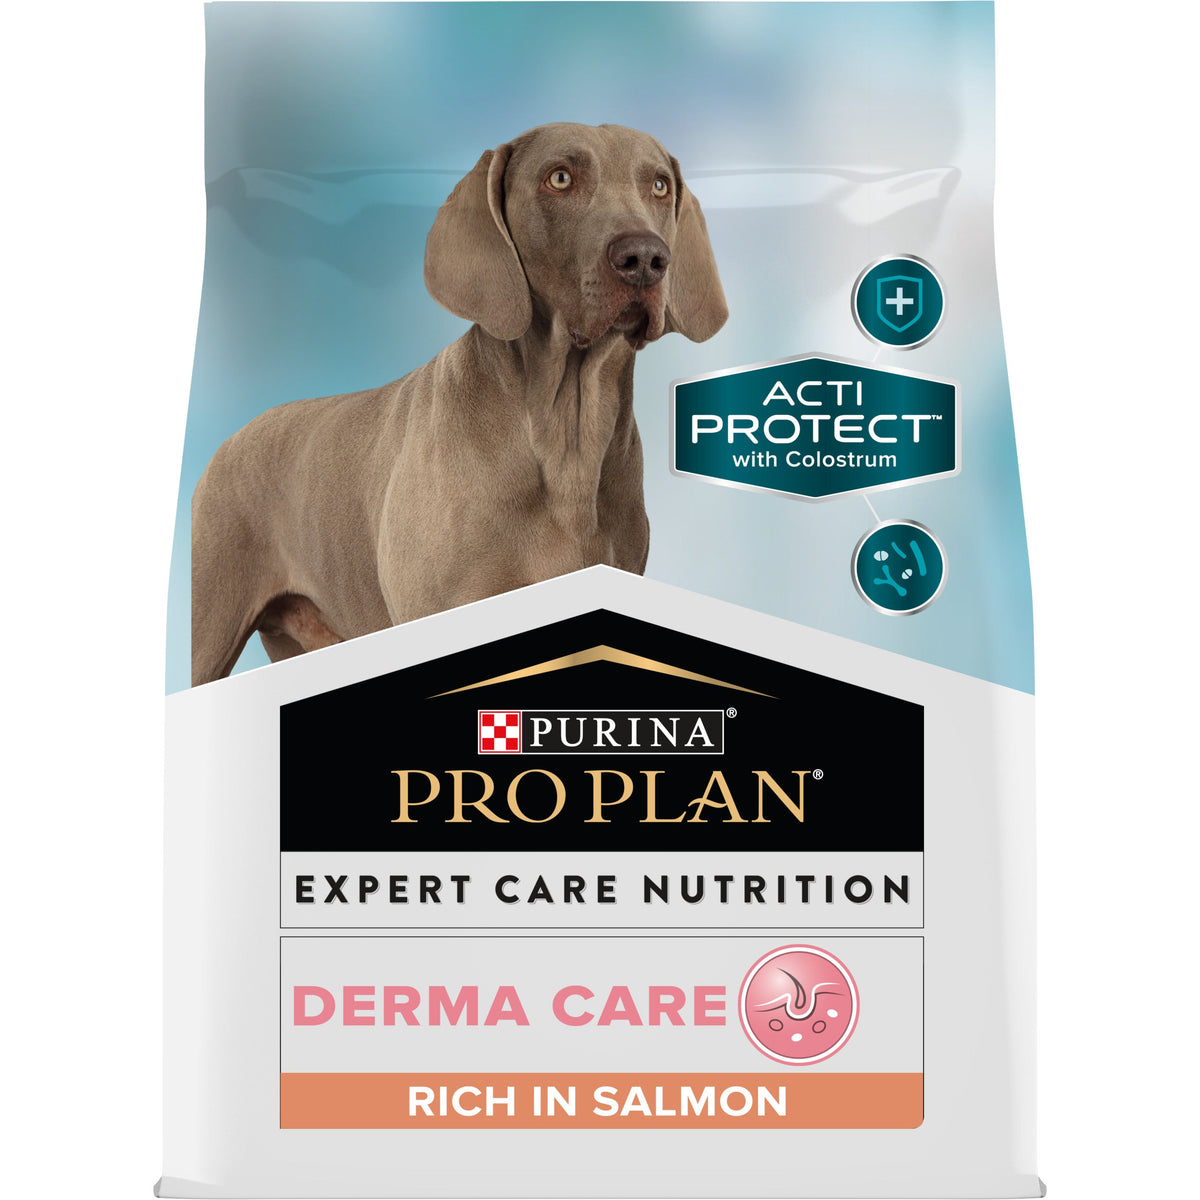 PURINA® PRO PLAN® Expert Care Nutrition - Acti-Protect™ Adult Derma Care.